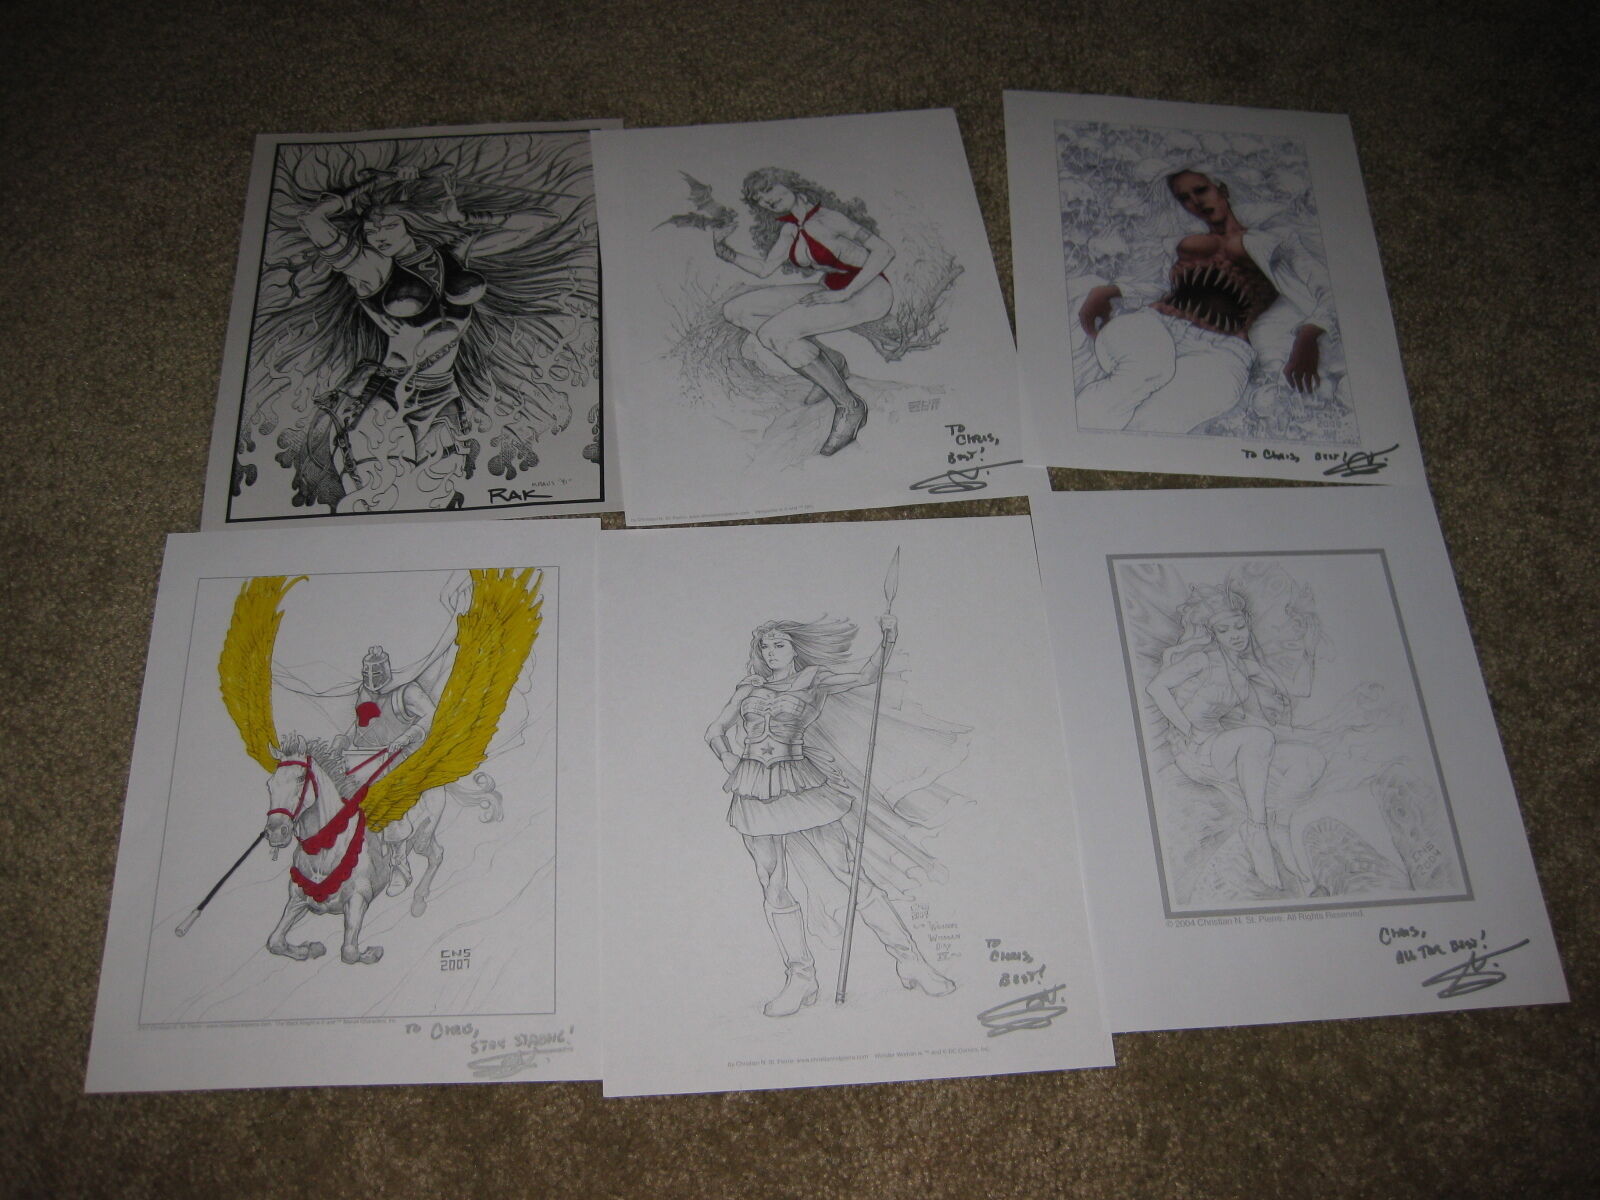 Lot of 6 Signed Pieces Of Artwork by Christian N St. Pierre